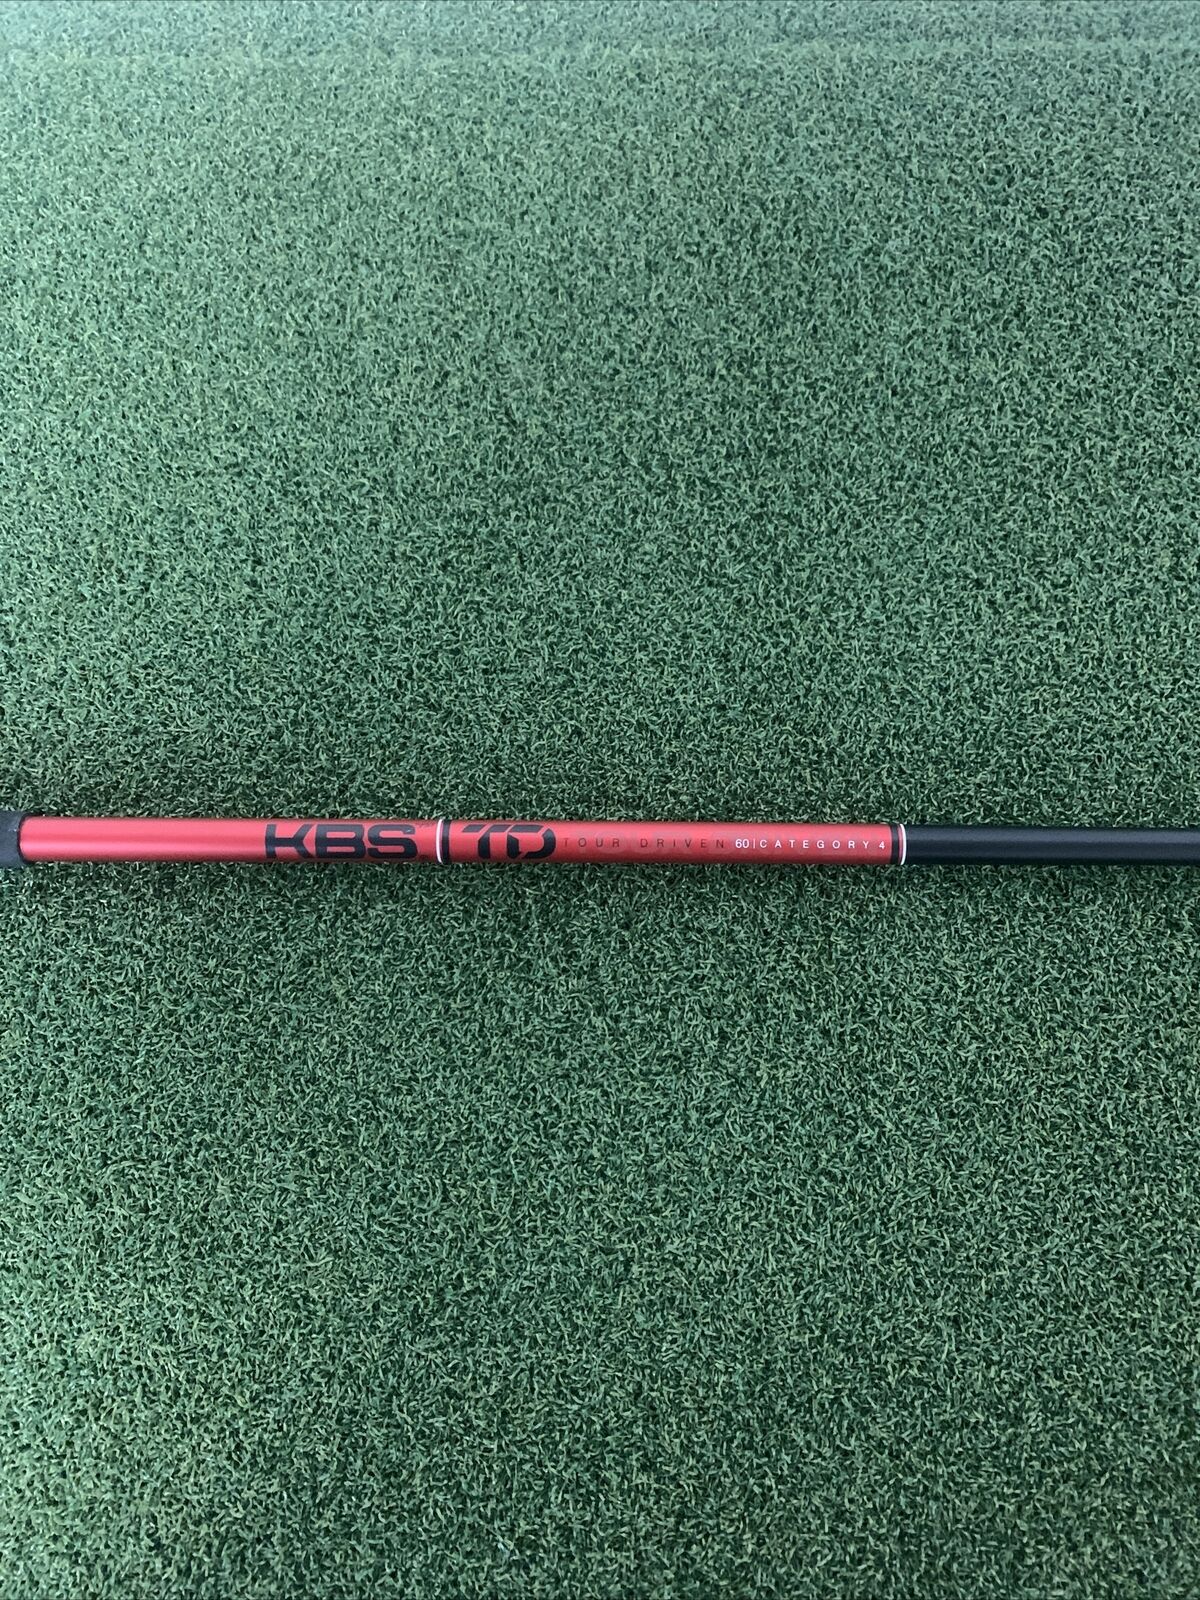 KBS TD Tour Driven 60 - Category 4 Driver Shaft  Extra Stiff - Titleist